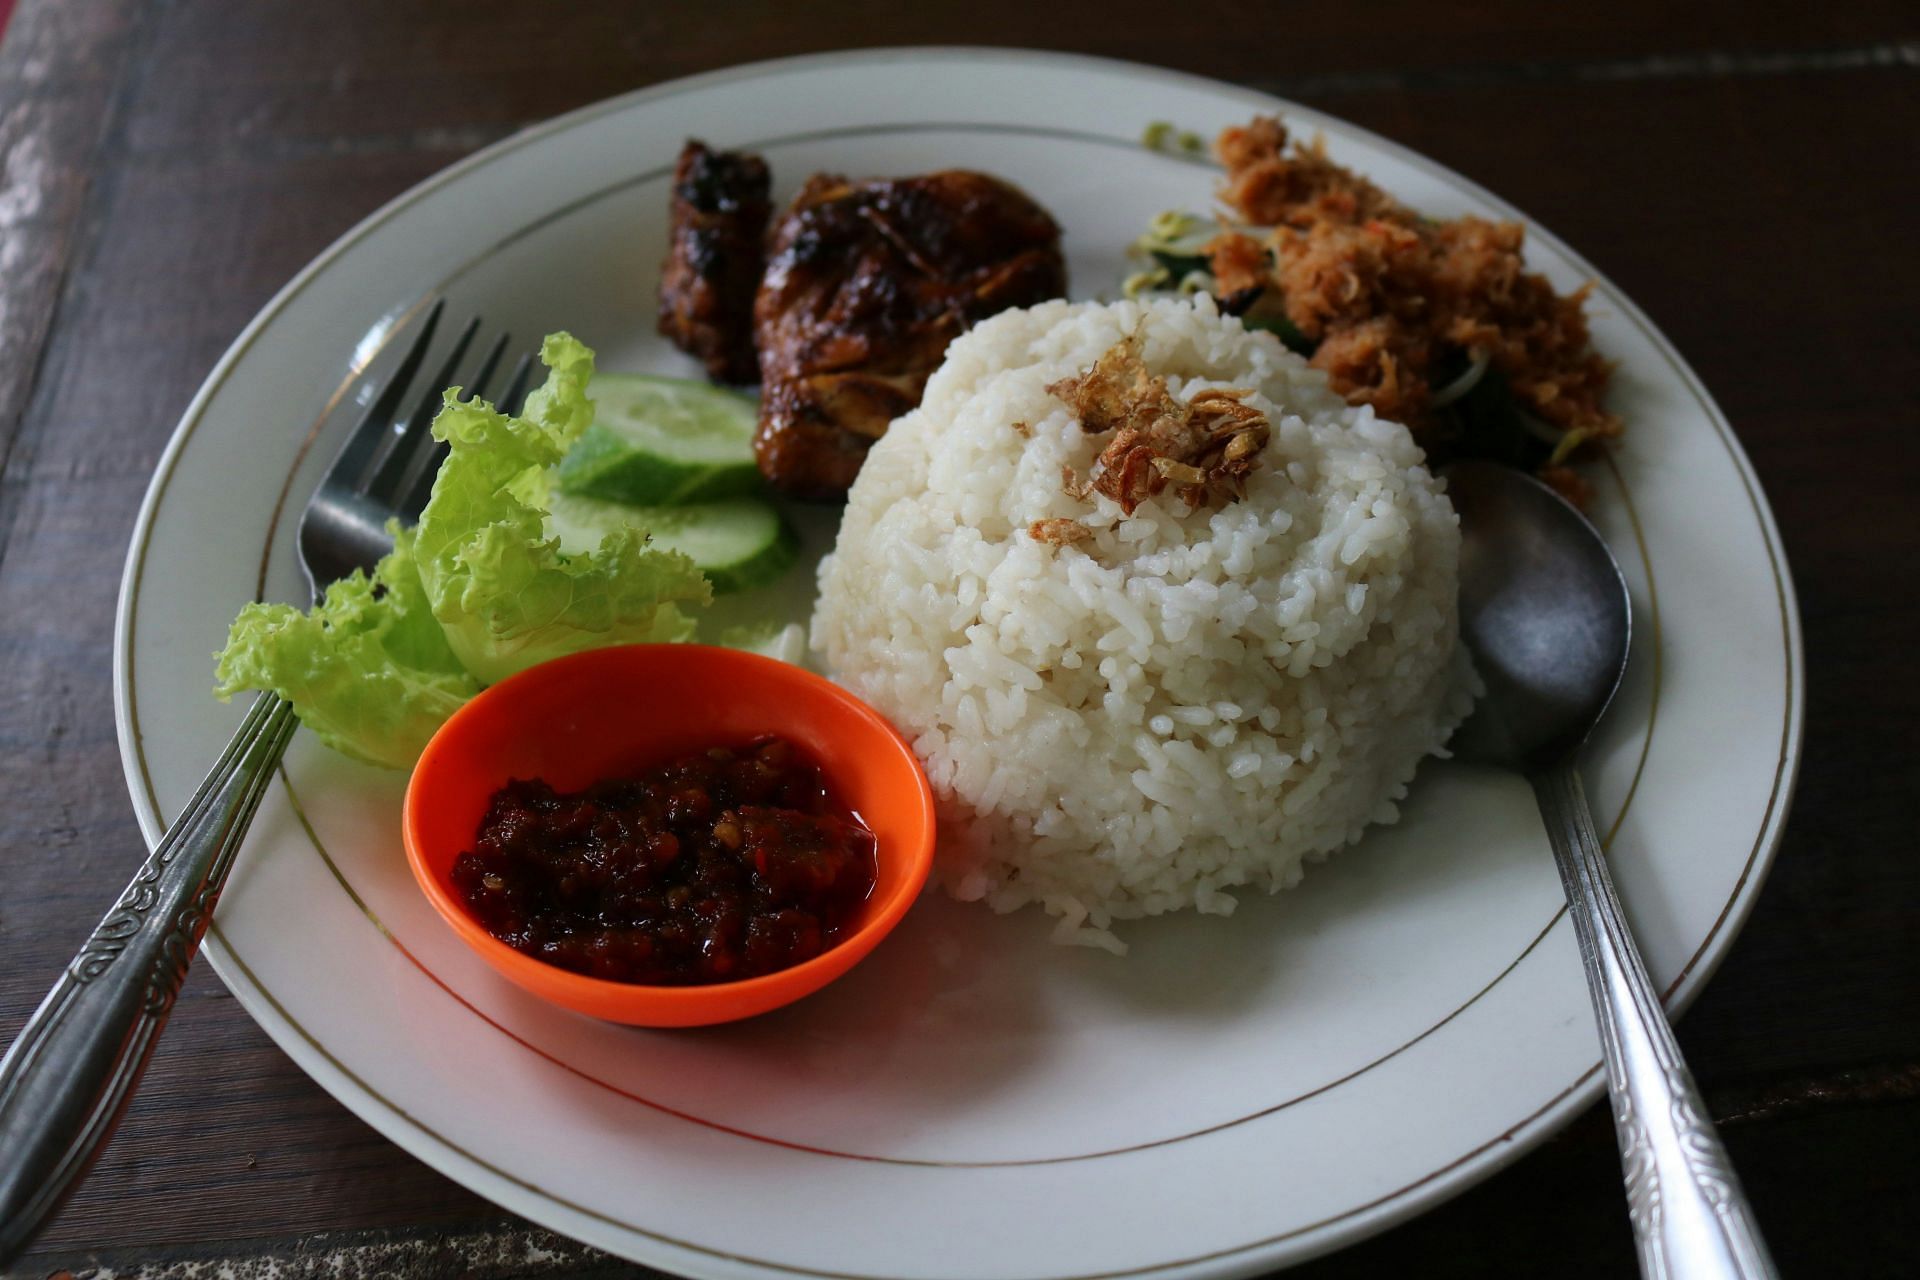 Eat small portions when you are on the rice diet plan. (Image by Mufid Majnun/Unsplash)